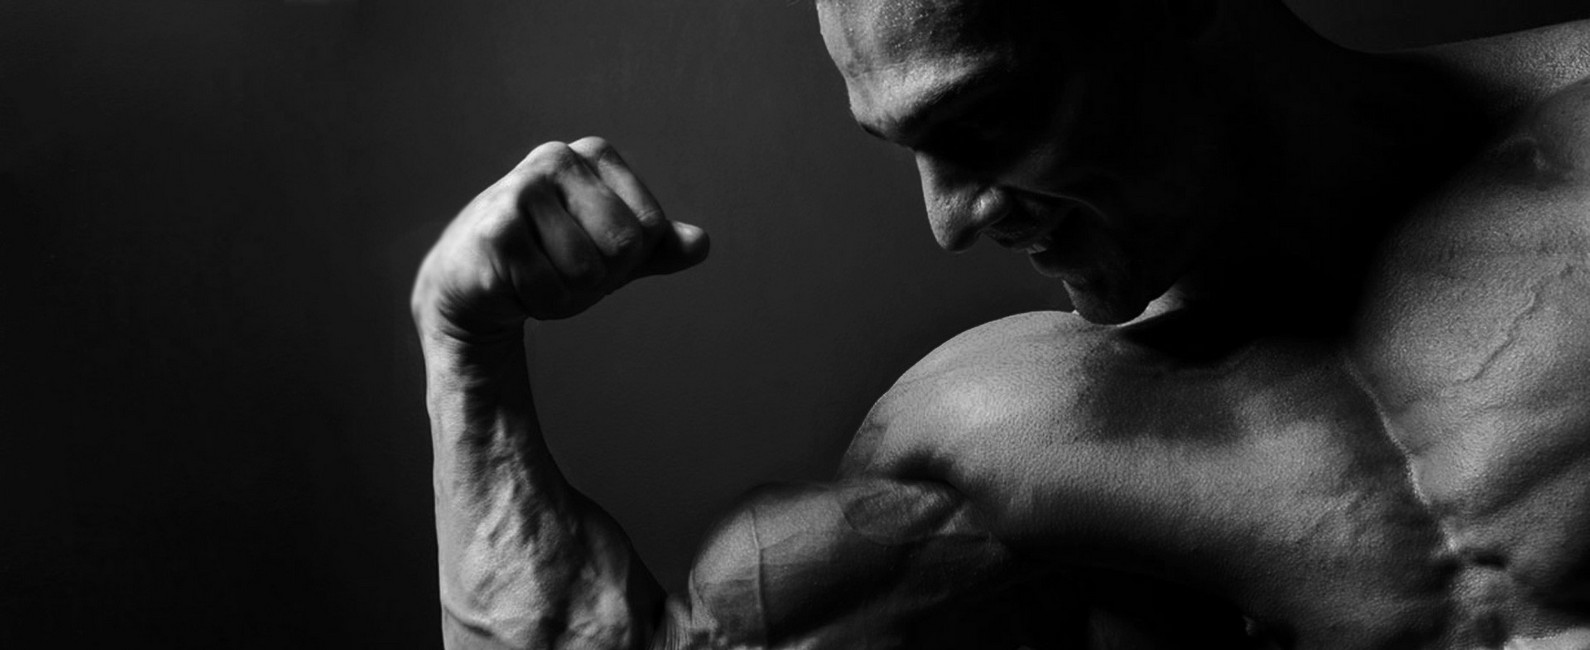 do steroids make you lose weight